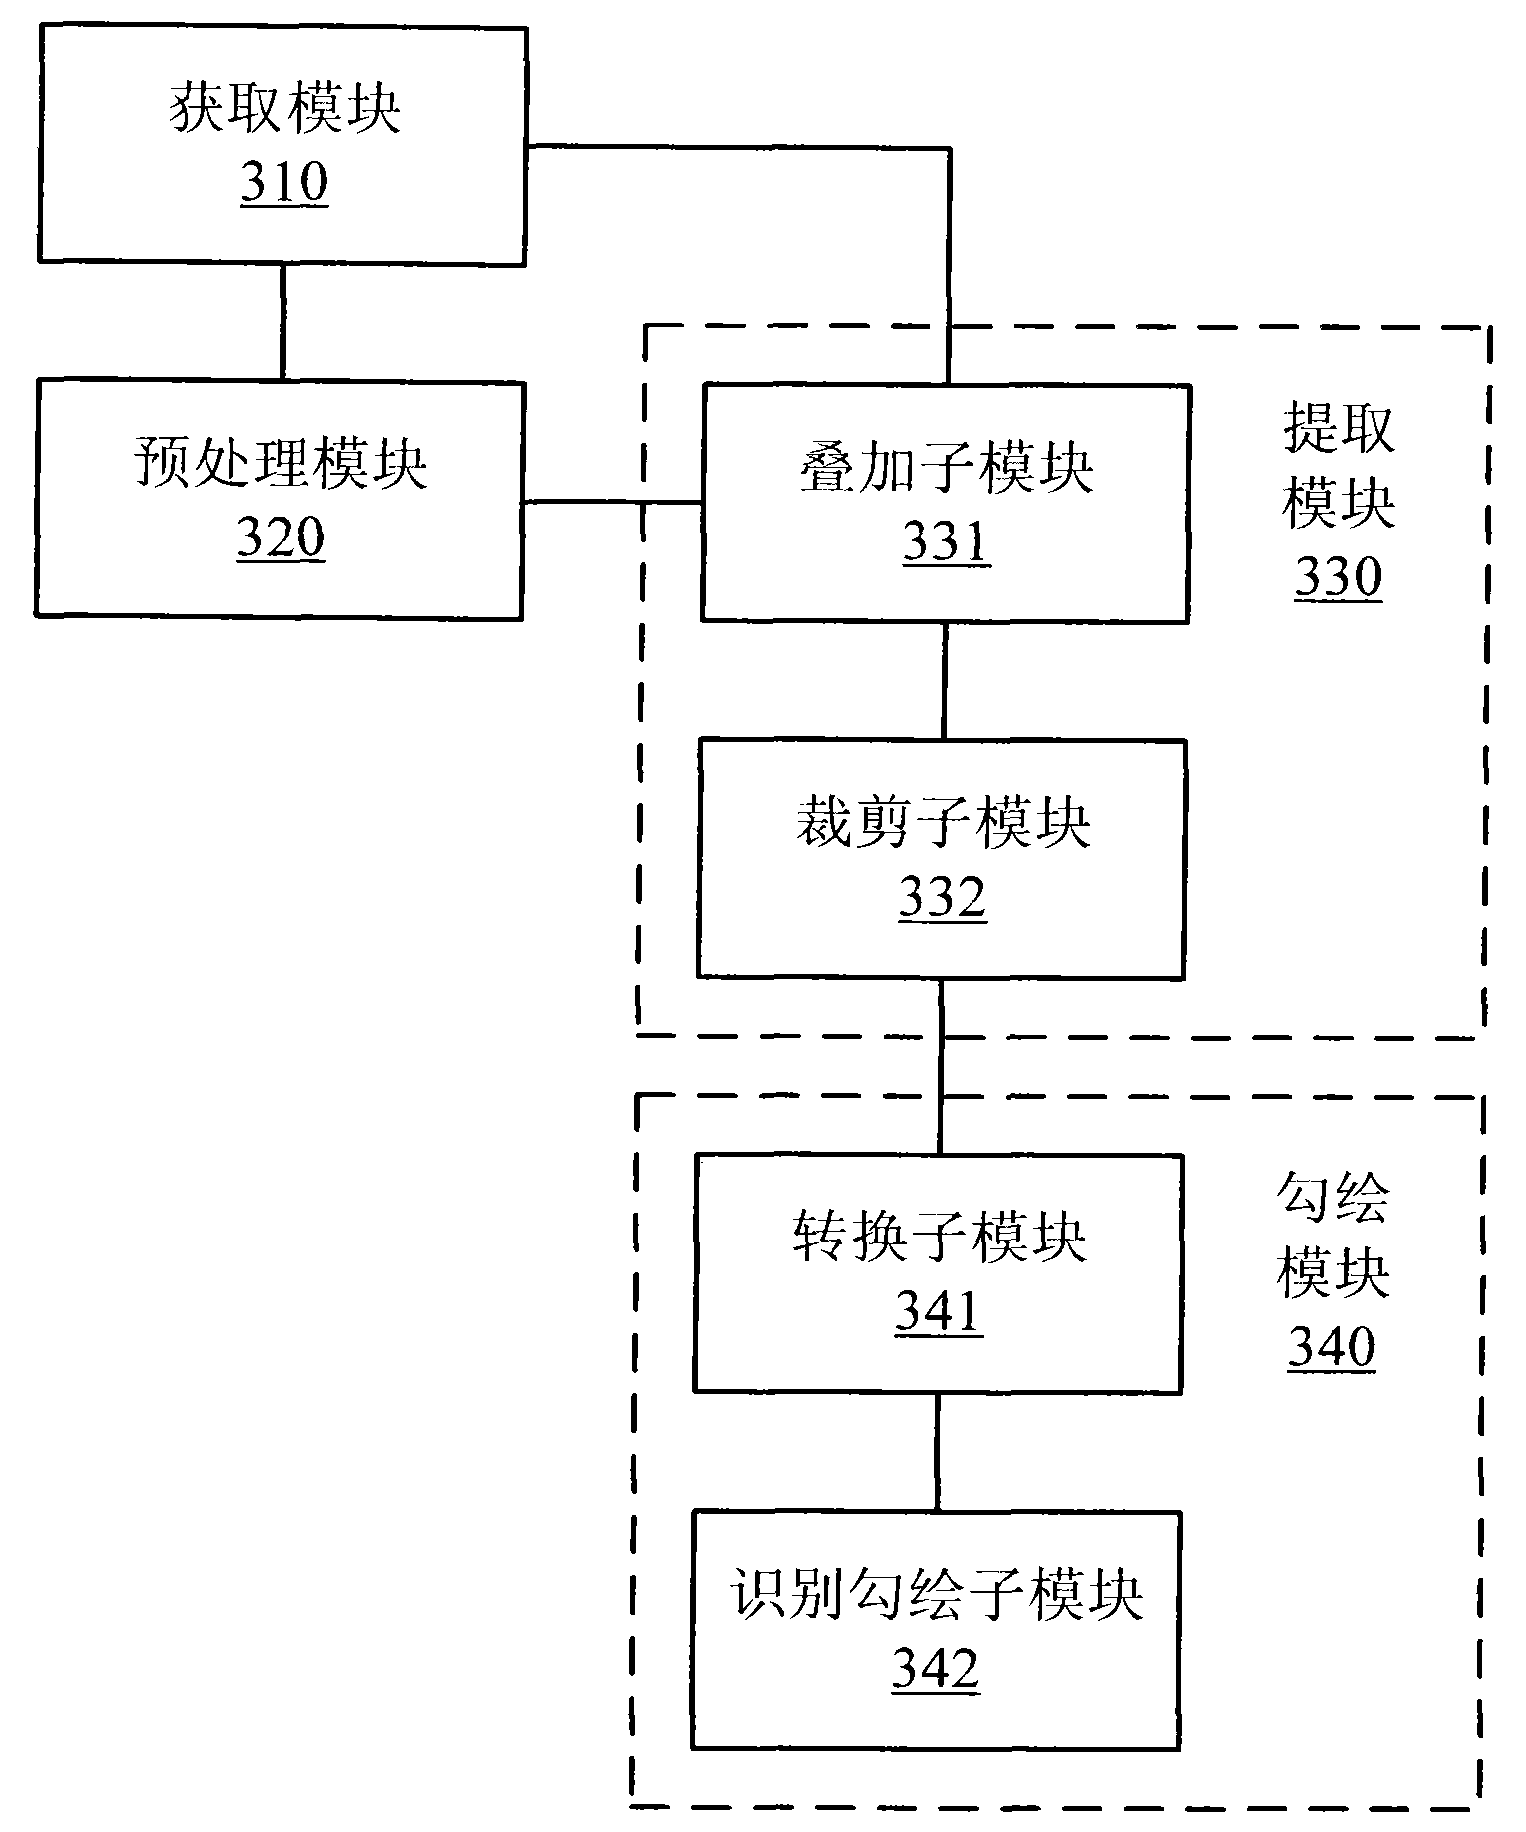 High spatial resolution remote sensing image crown outline delineation system and method